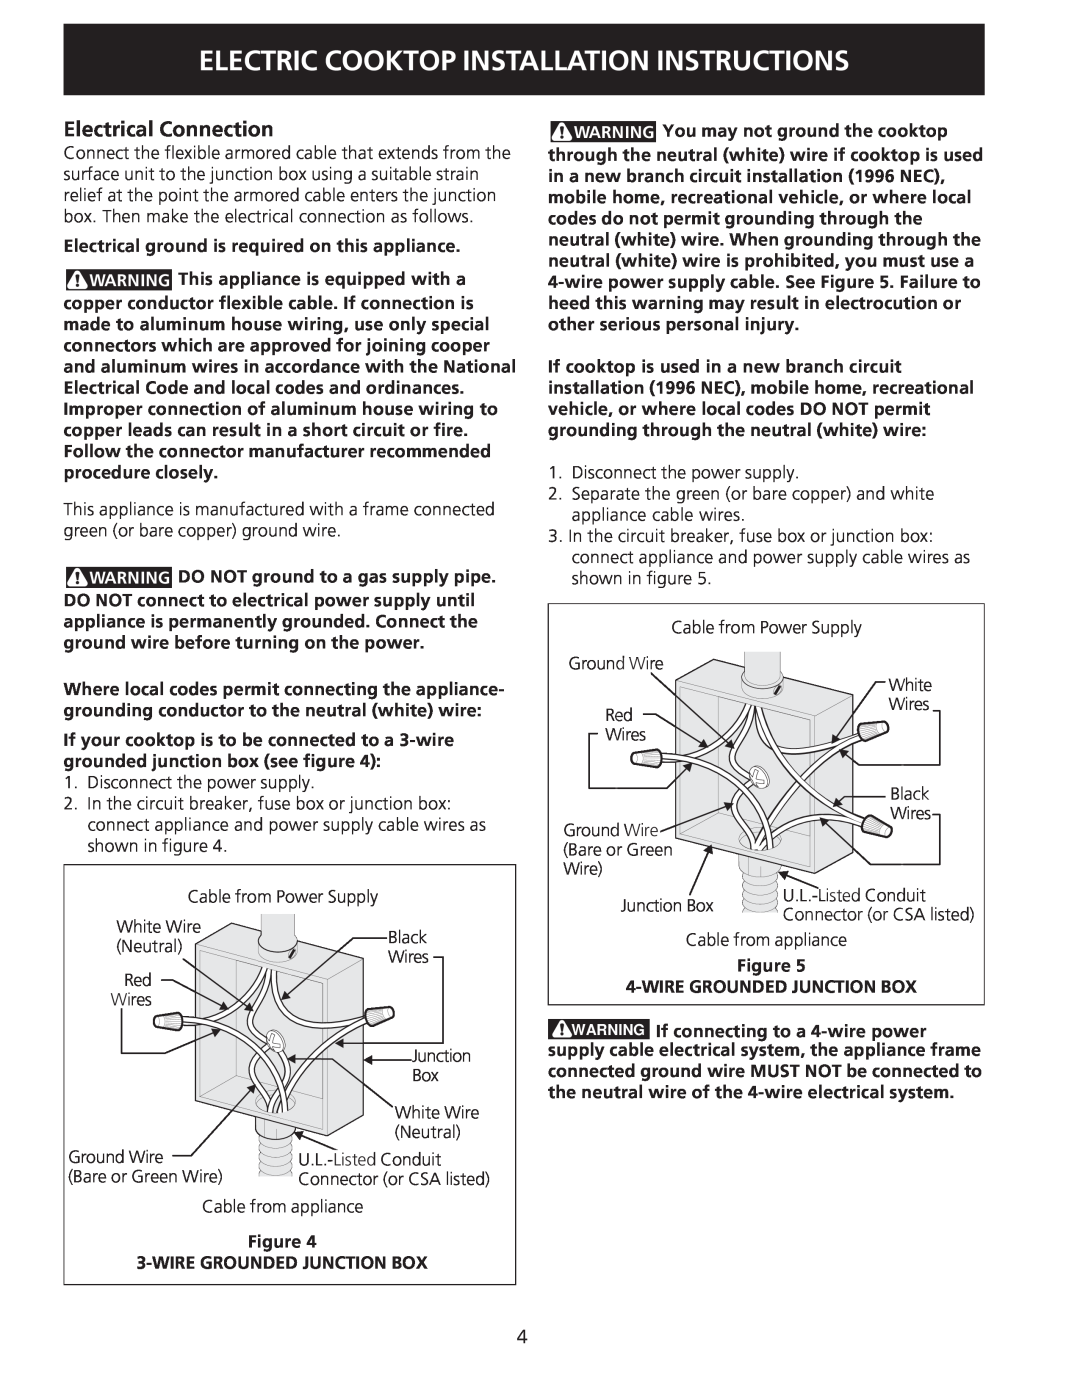 Electrolux 30 installation instructions Electrical Connection, Electric Cooktop Installation Instructions 